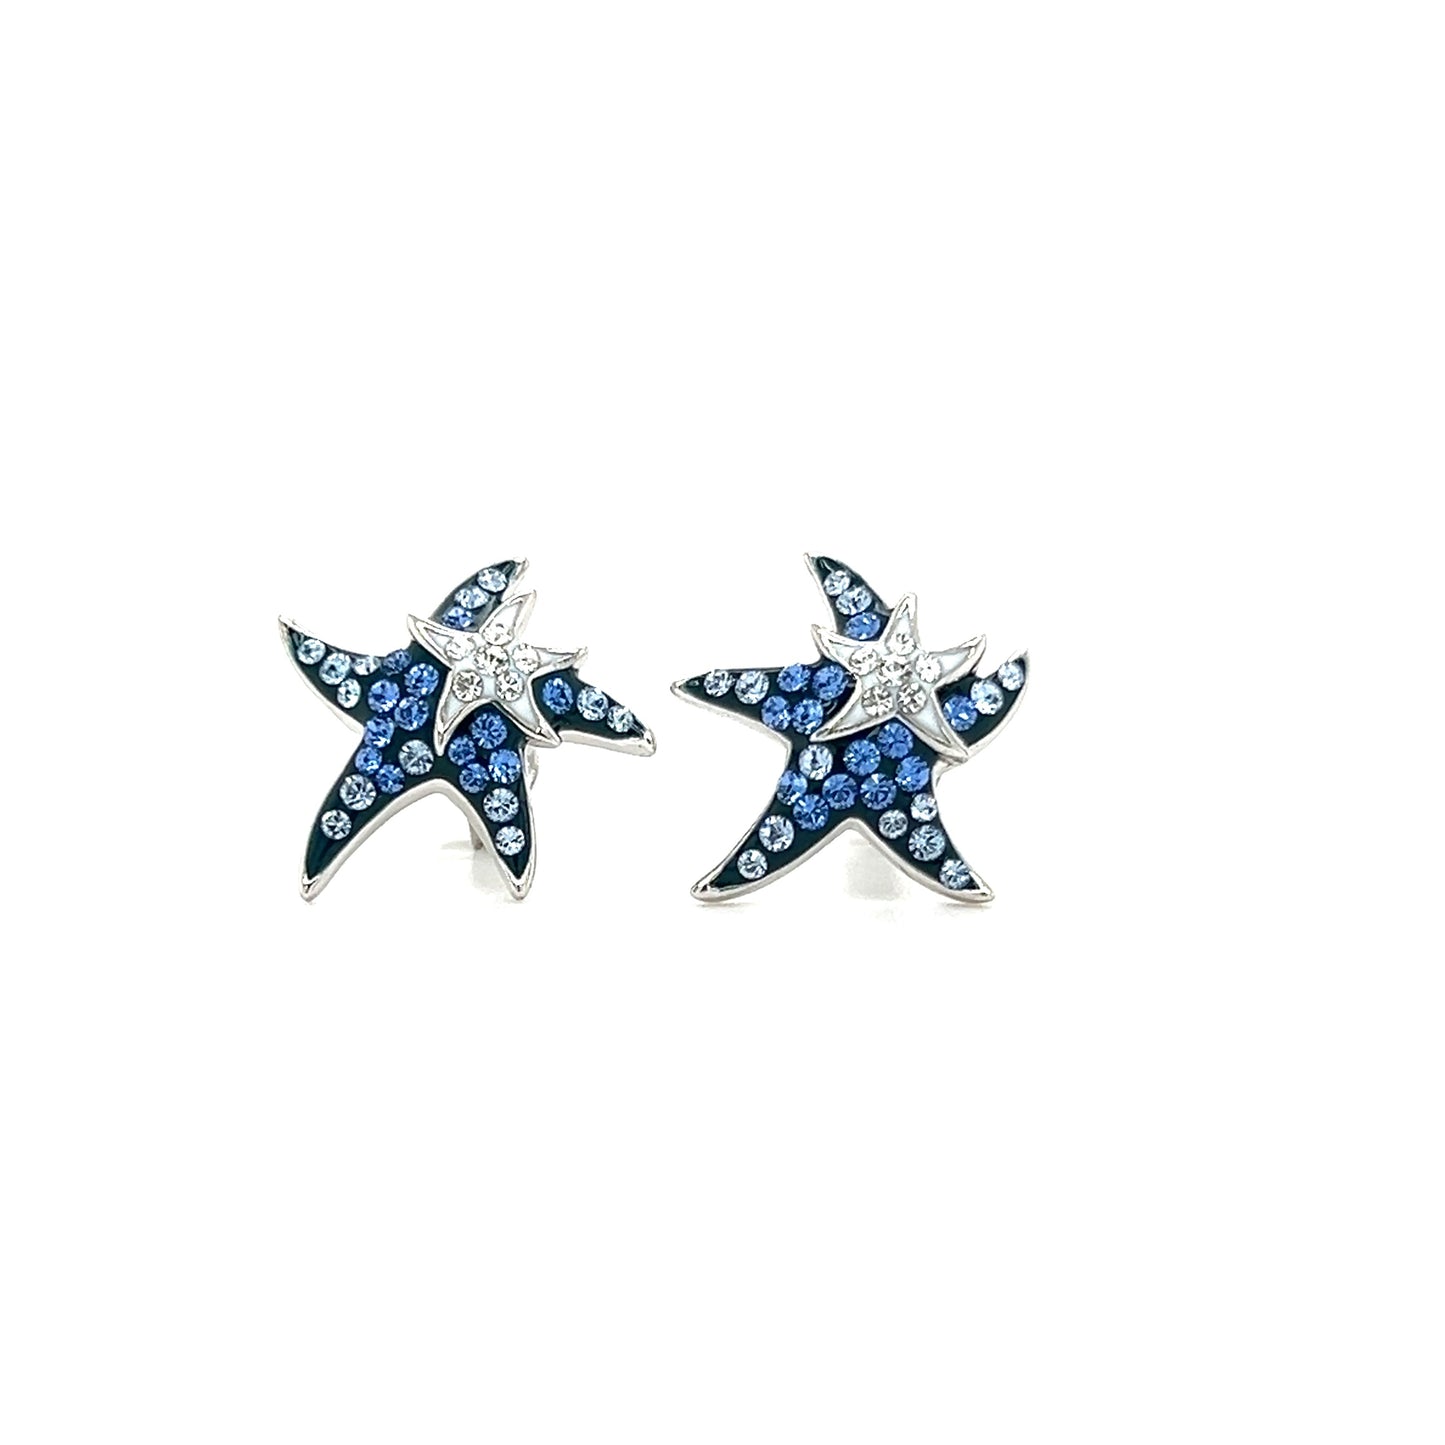 Blue and White Starfish Post Earrings with White and Blue Crystals in Sterling Silver Front View